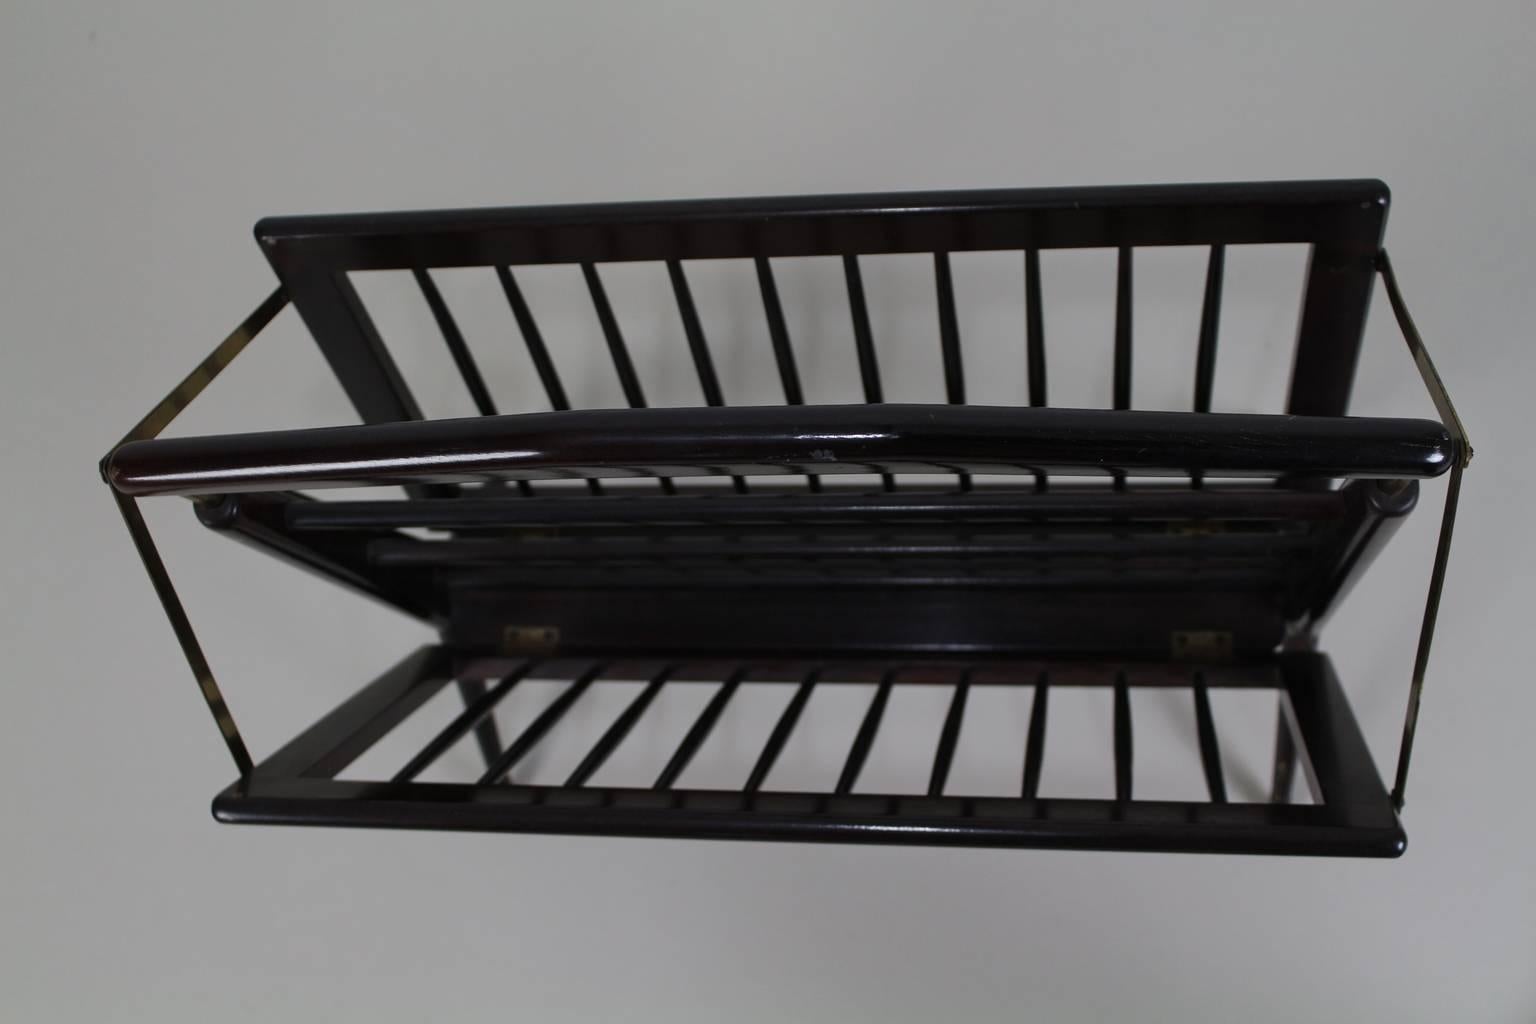 Foldable Italian Design Magazine Rack with Brass Details In Excellent Condition For Sale In Staphorst, NL